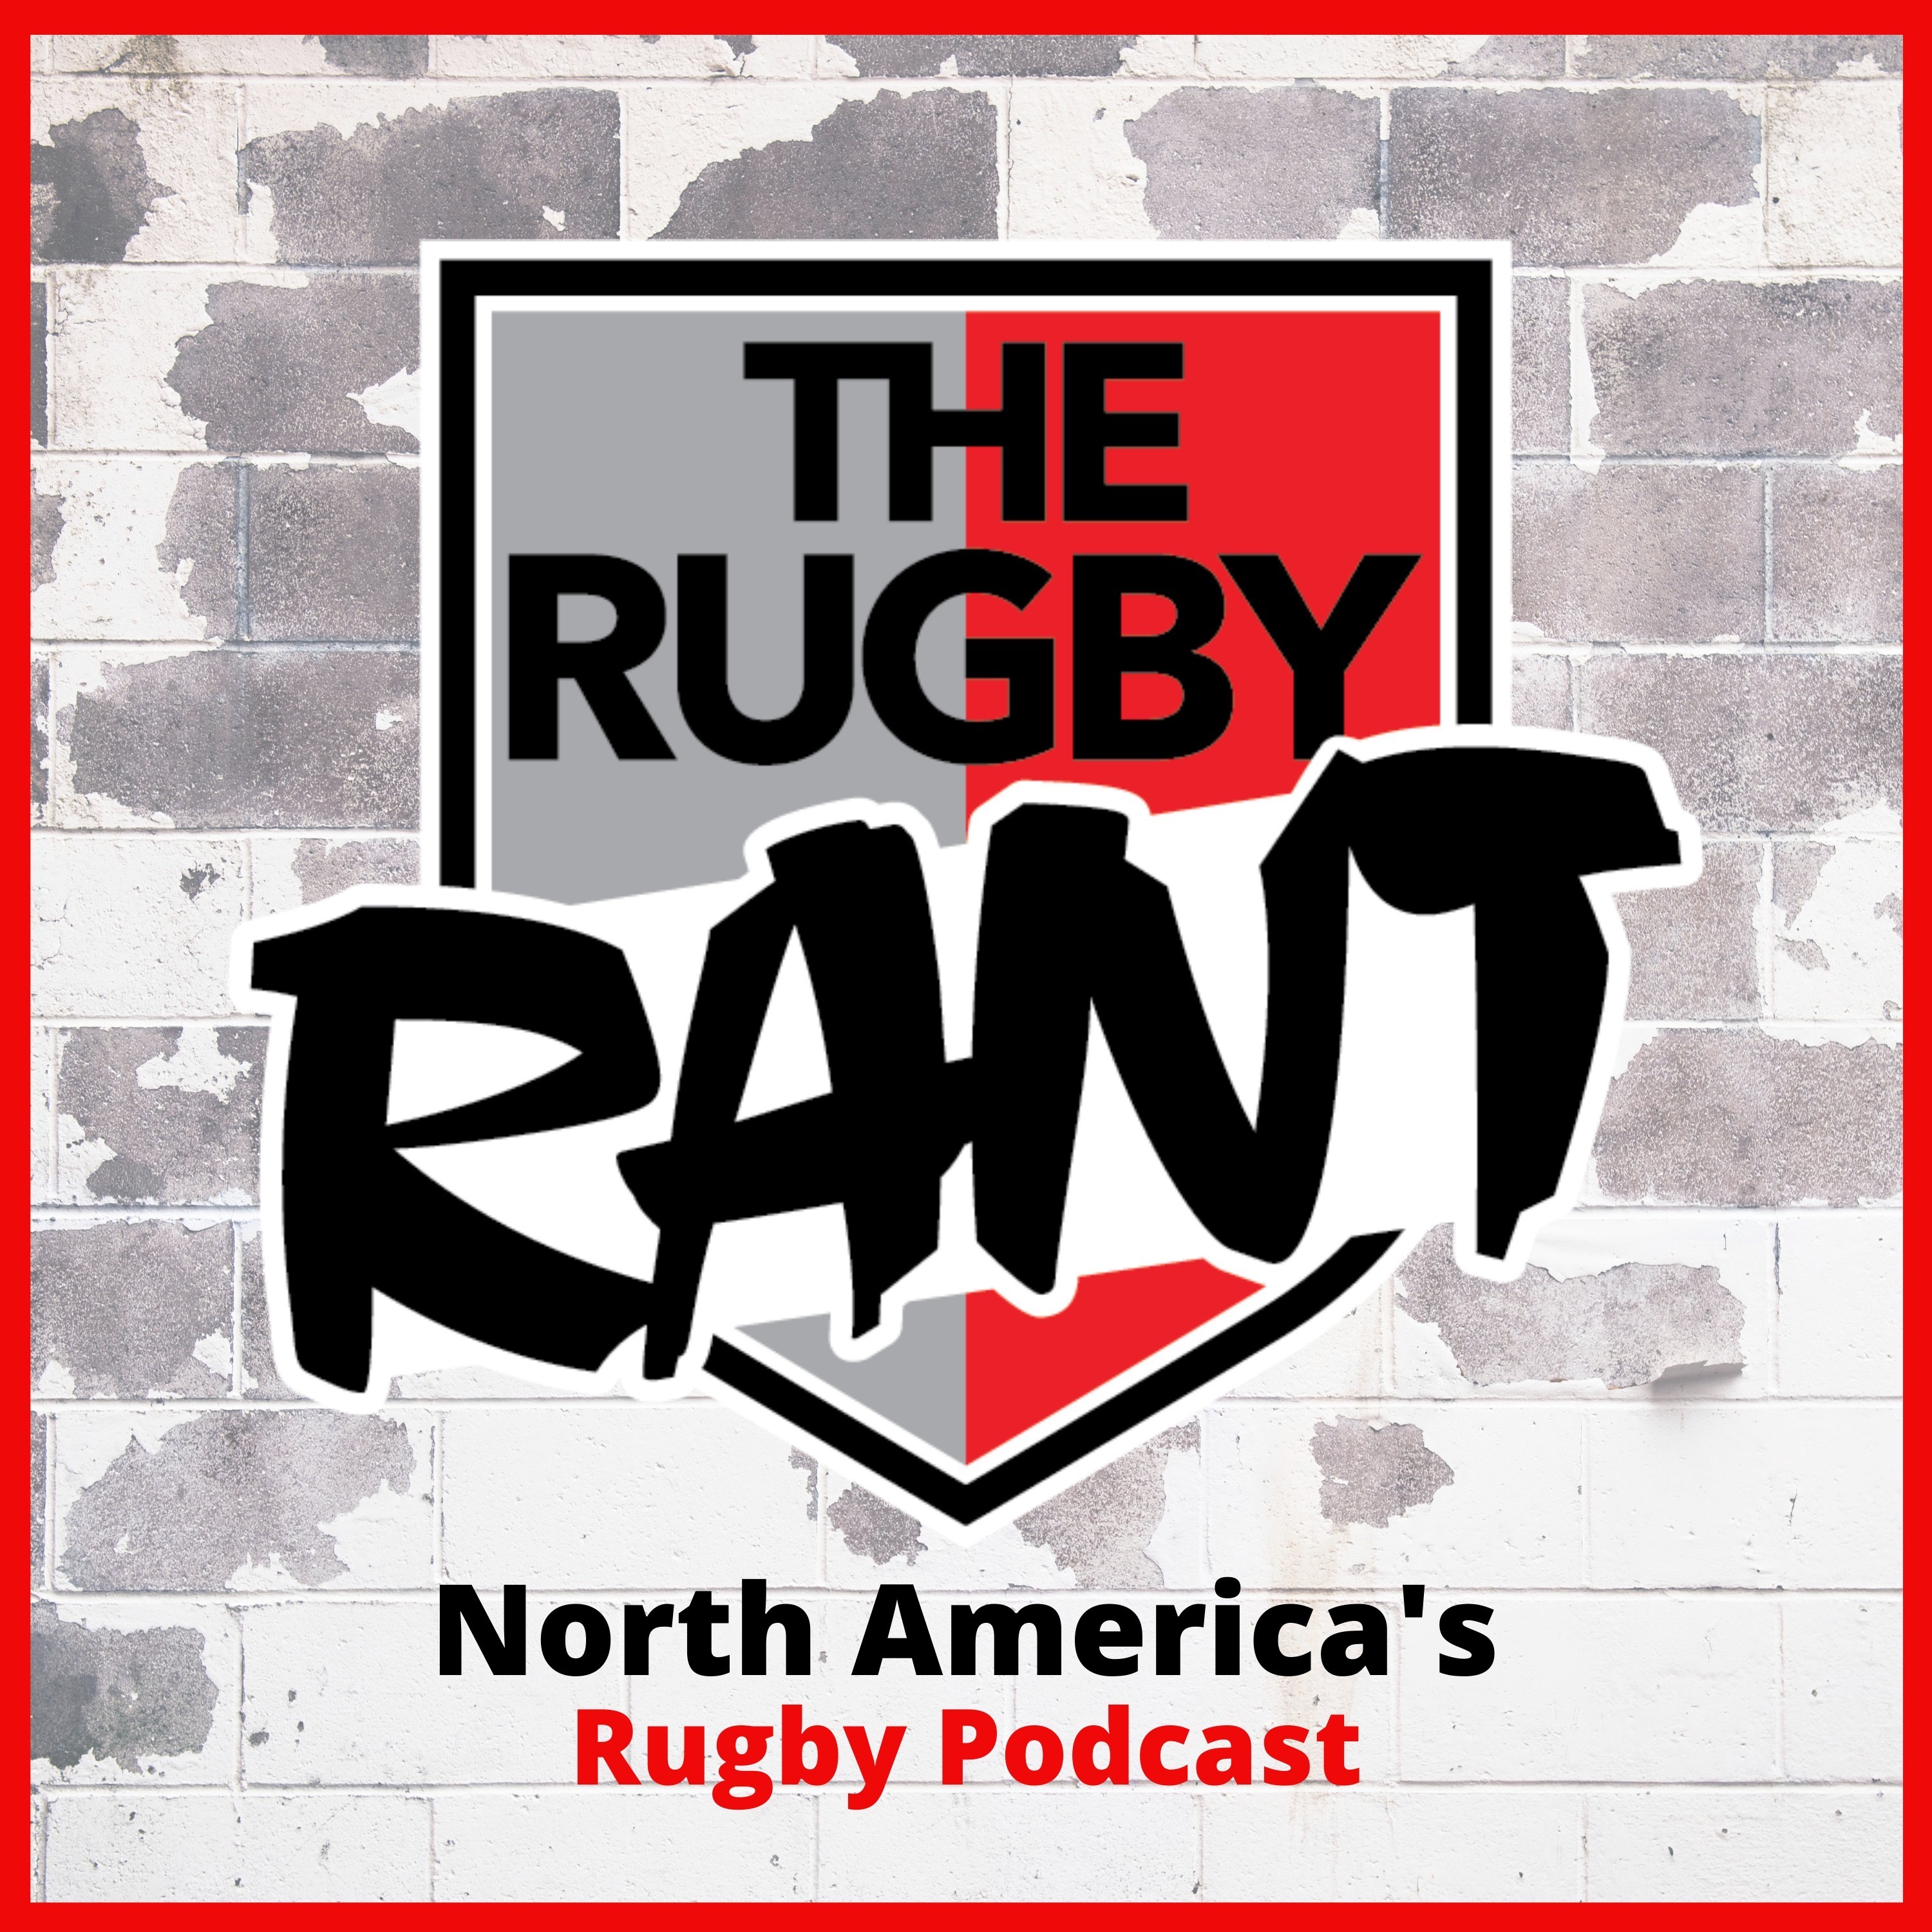 The Rugby Rant - Run, Pass or Kick with Rob Irimescu